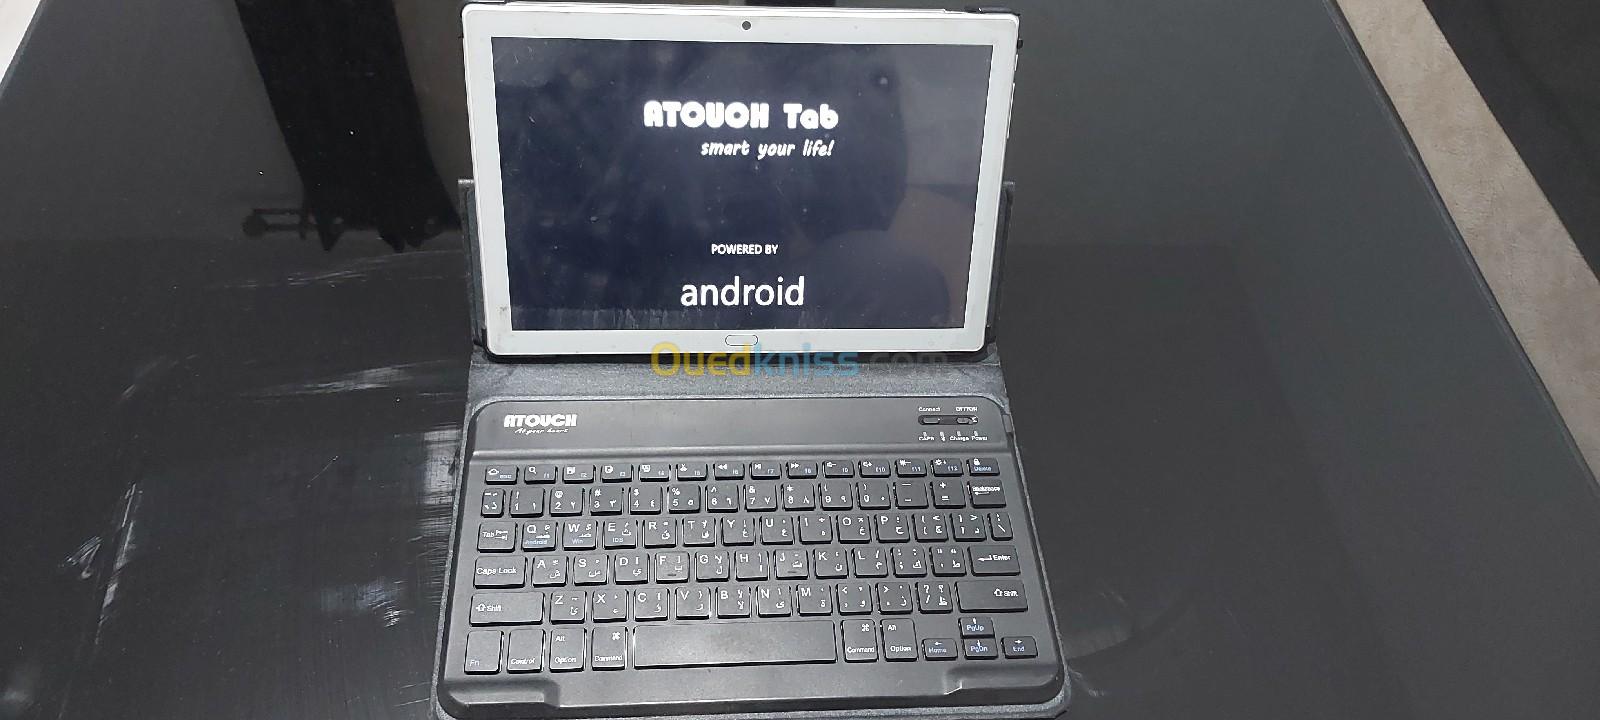 ATOUCH A105